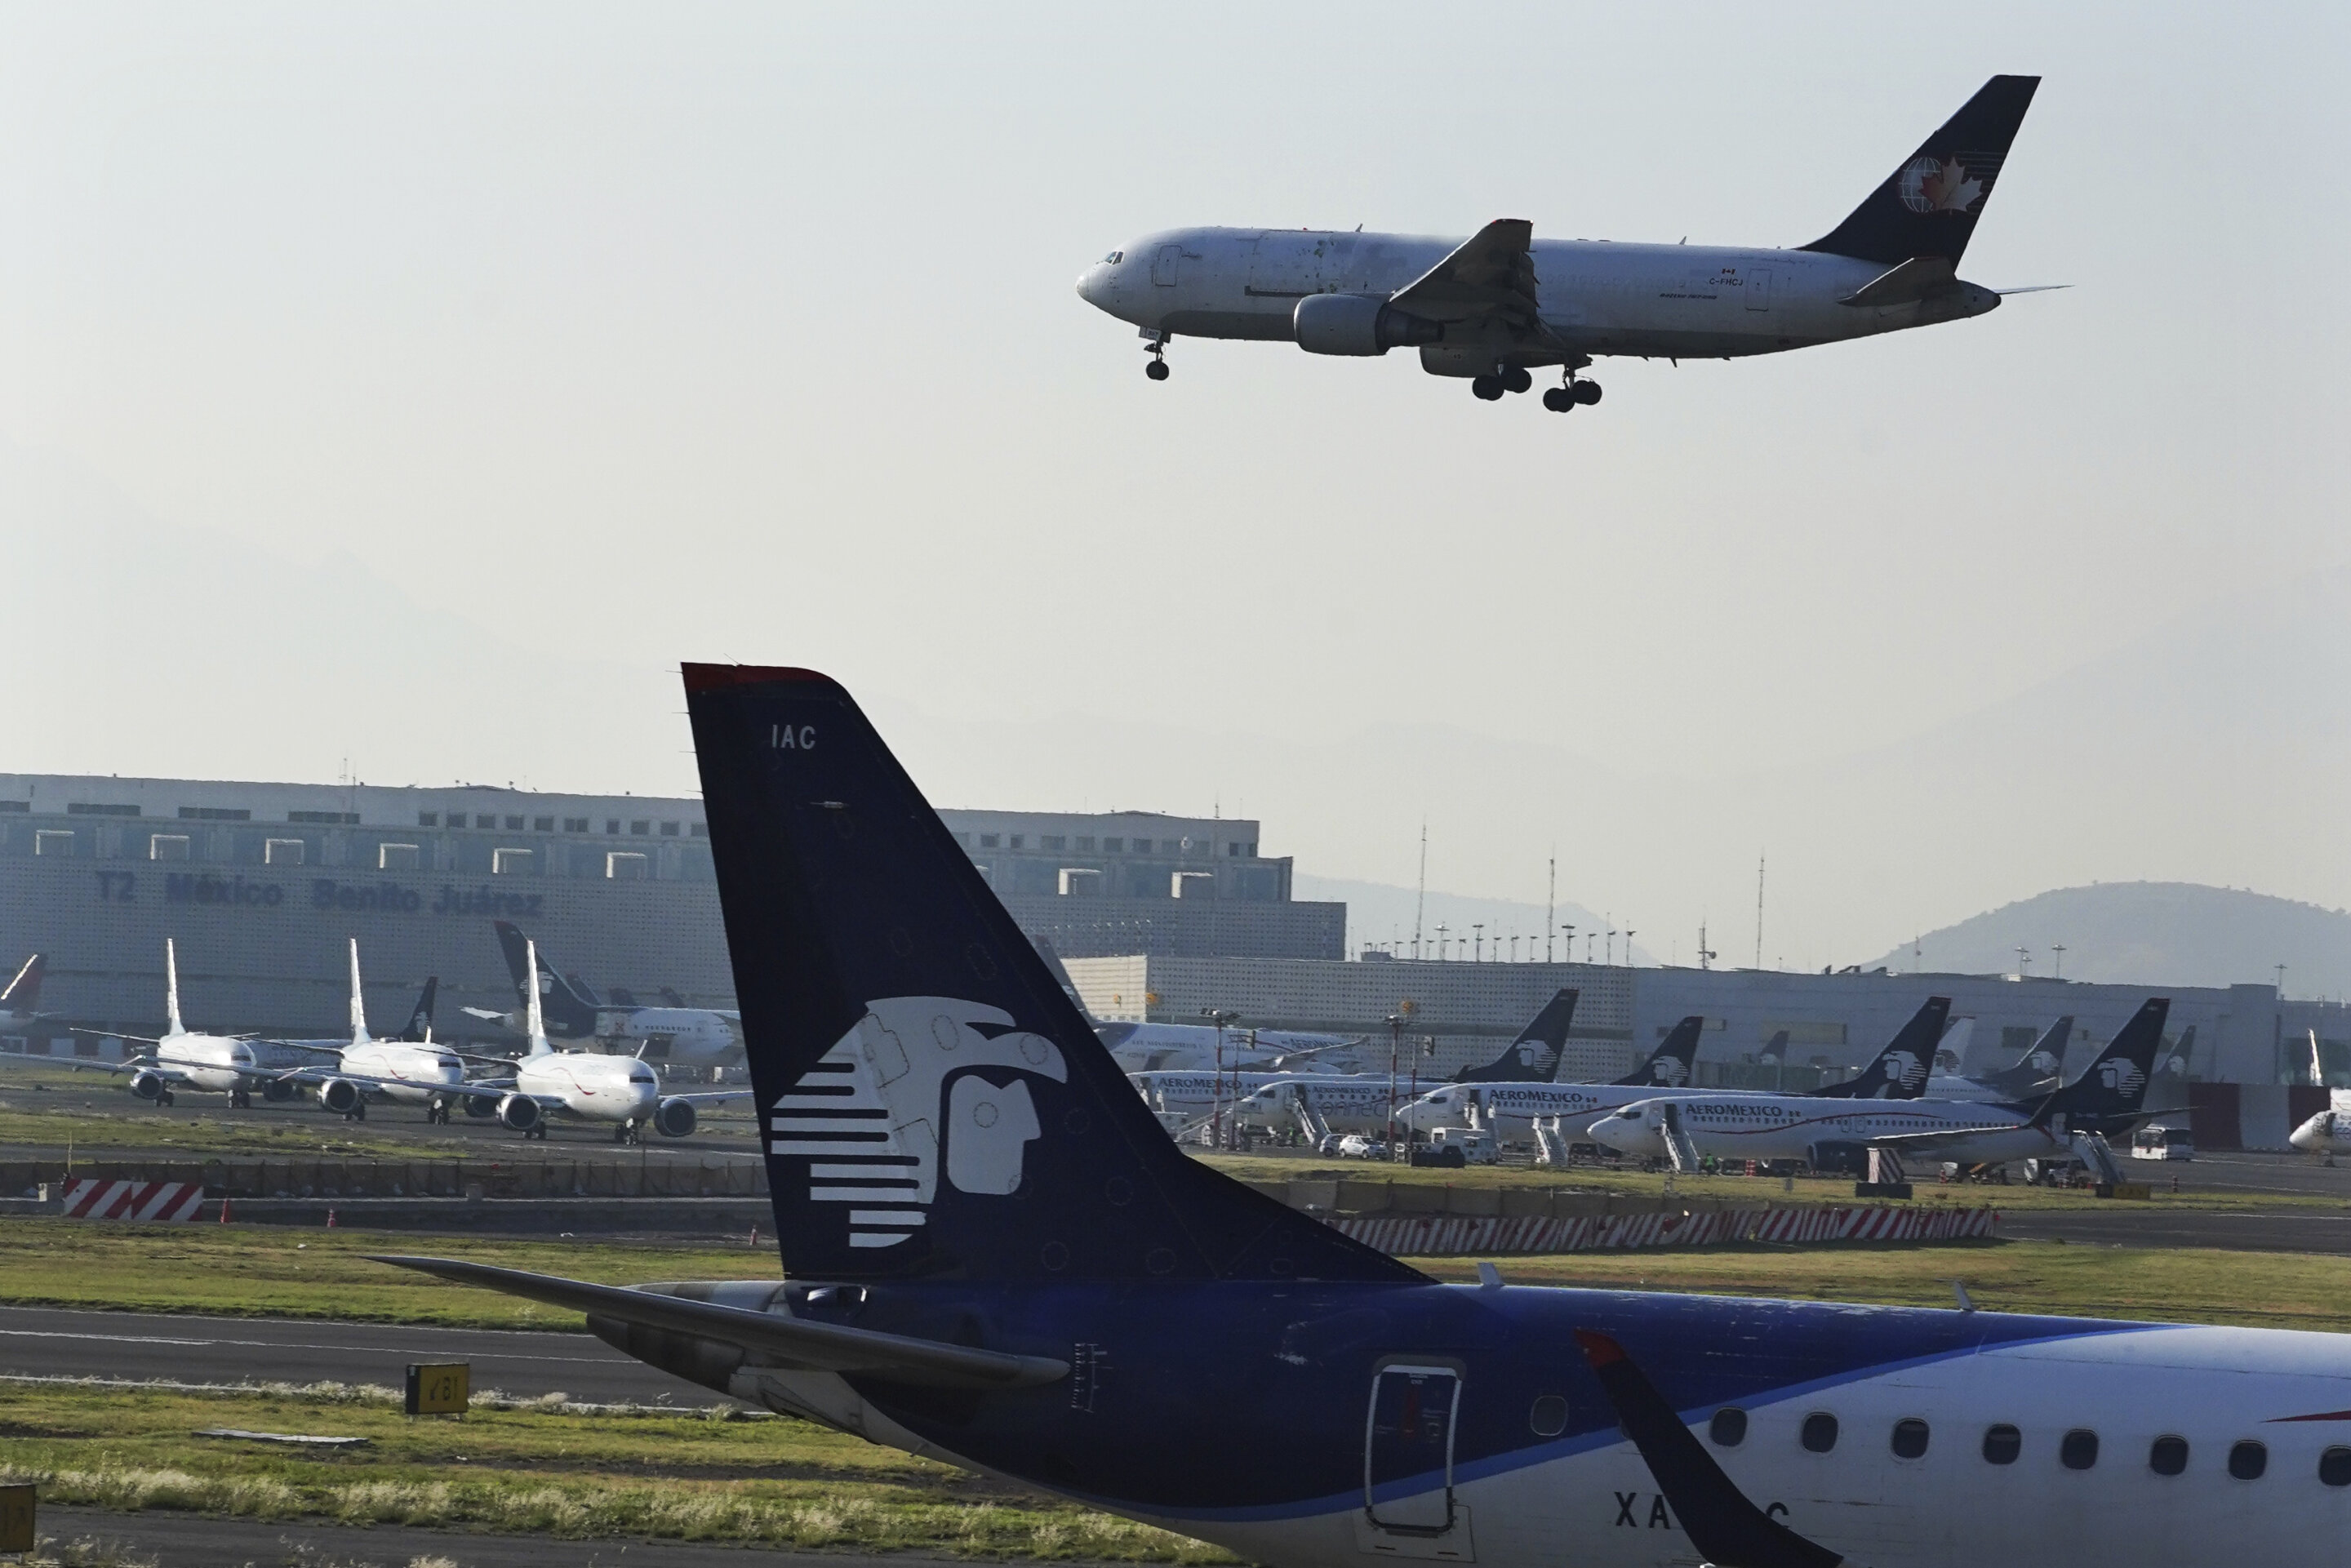 #Mexico’s domestic airline industry in shambles